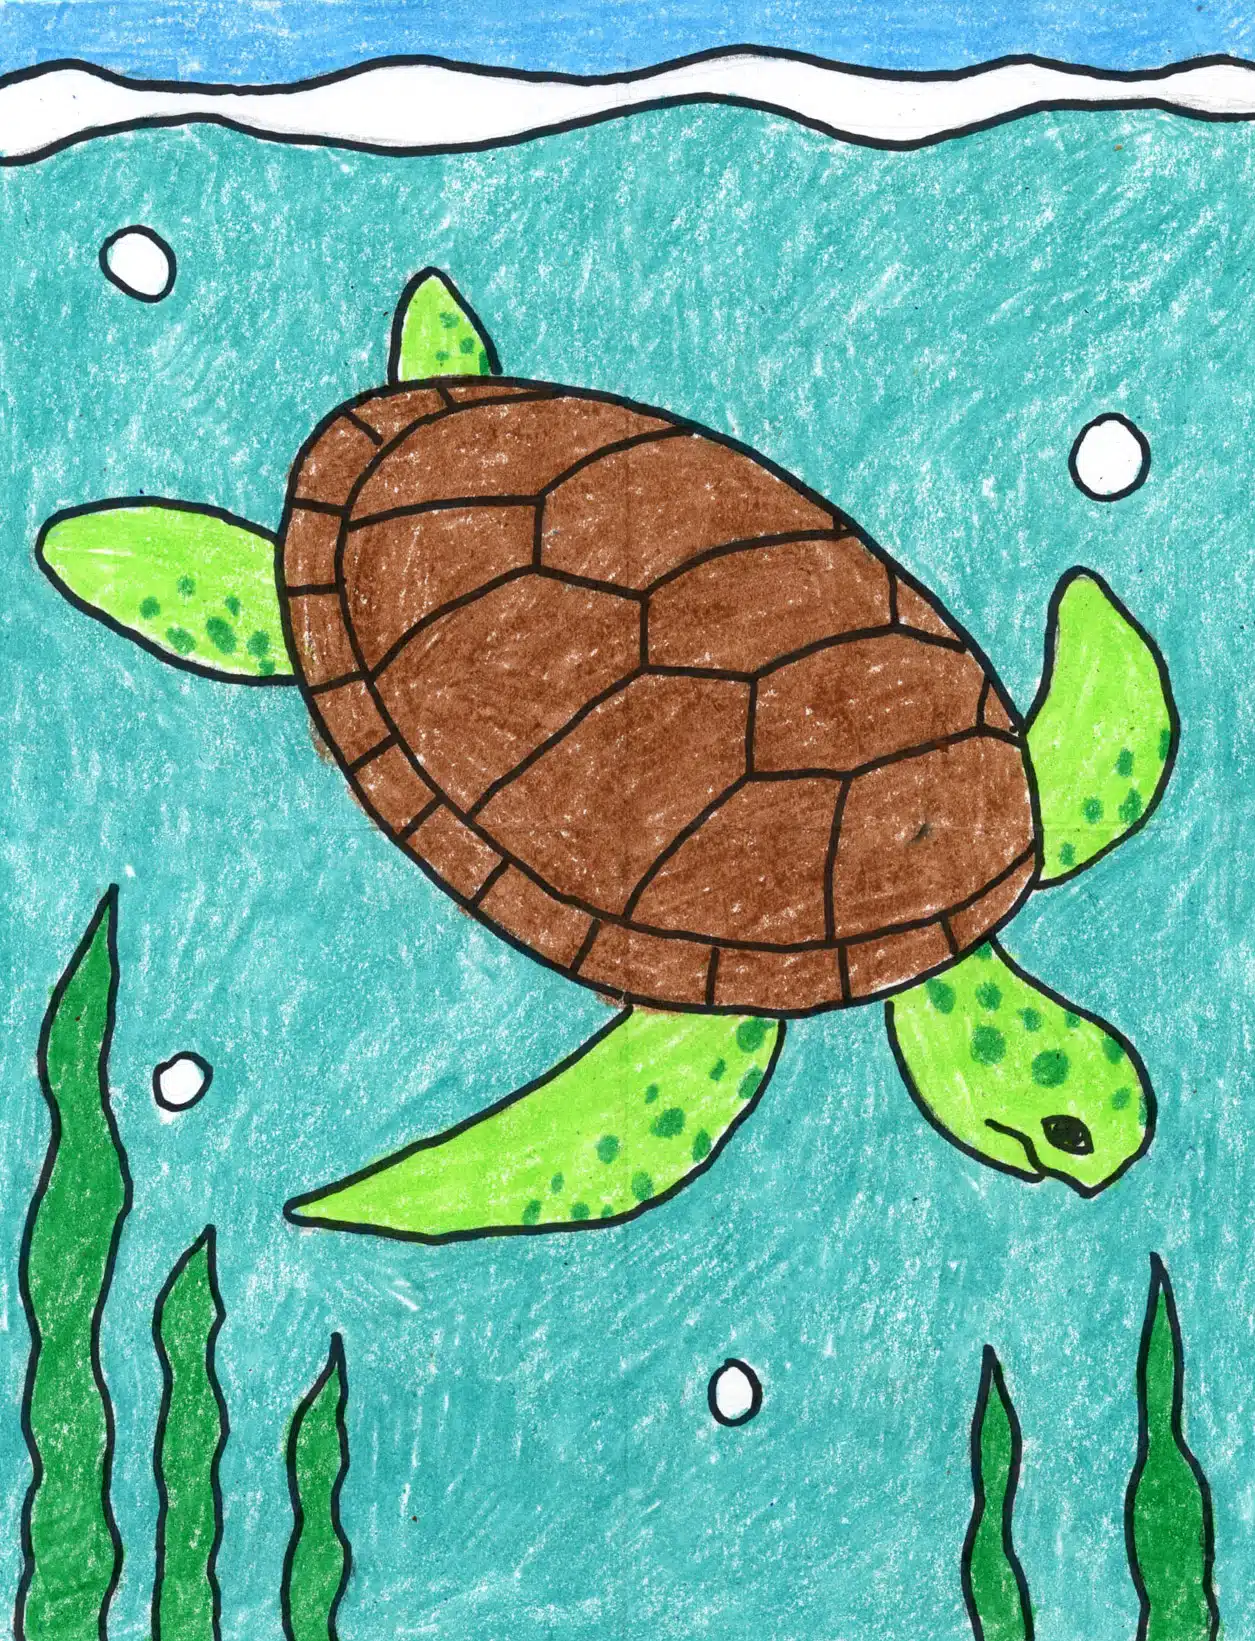 Easy How to Draw a Sea Turtle Tutorial Video and Sea Turtle Coloring Page